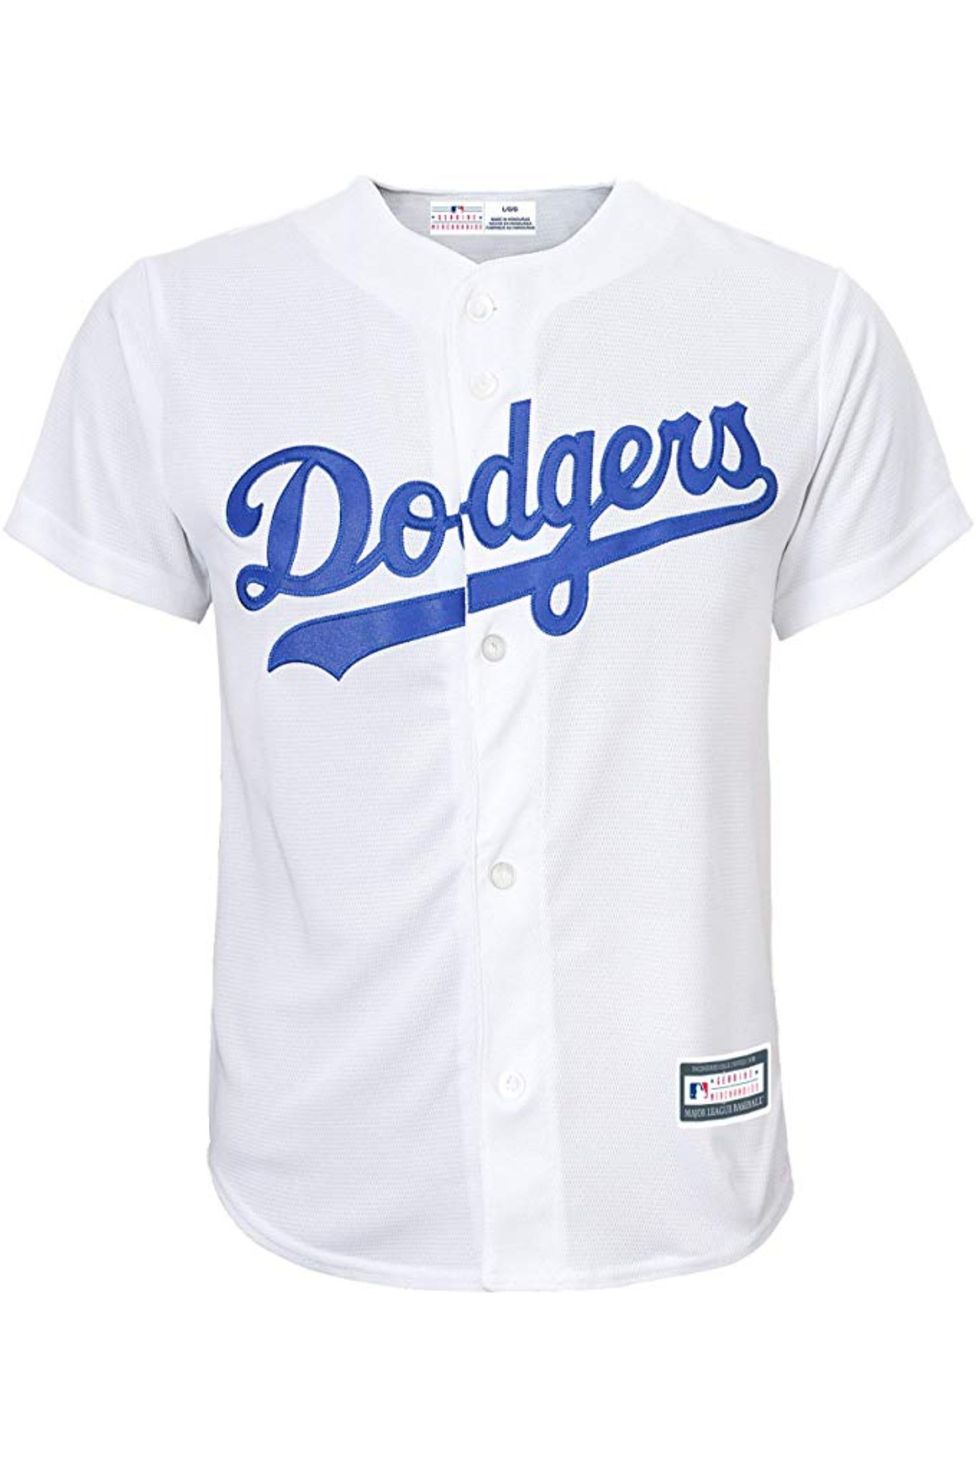 baseball jersey Outfit wearing an LA dodgers baseball jersey with a glitter  skirt and sneakers